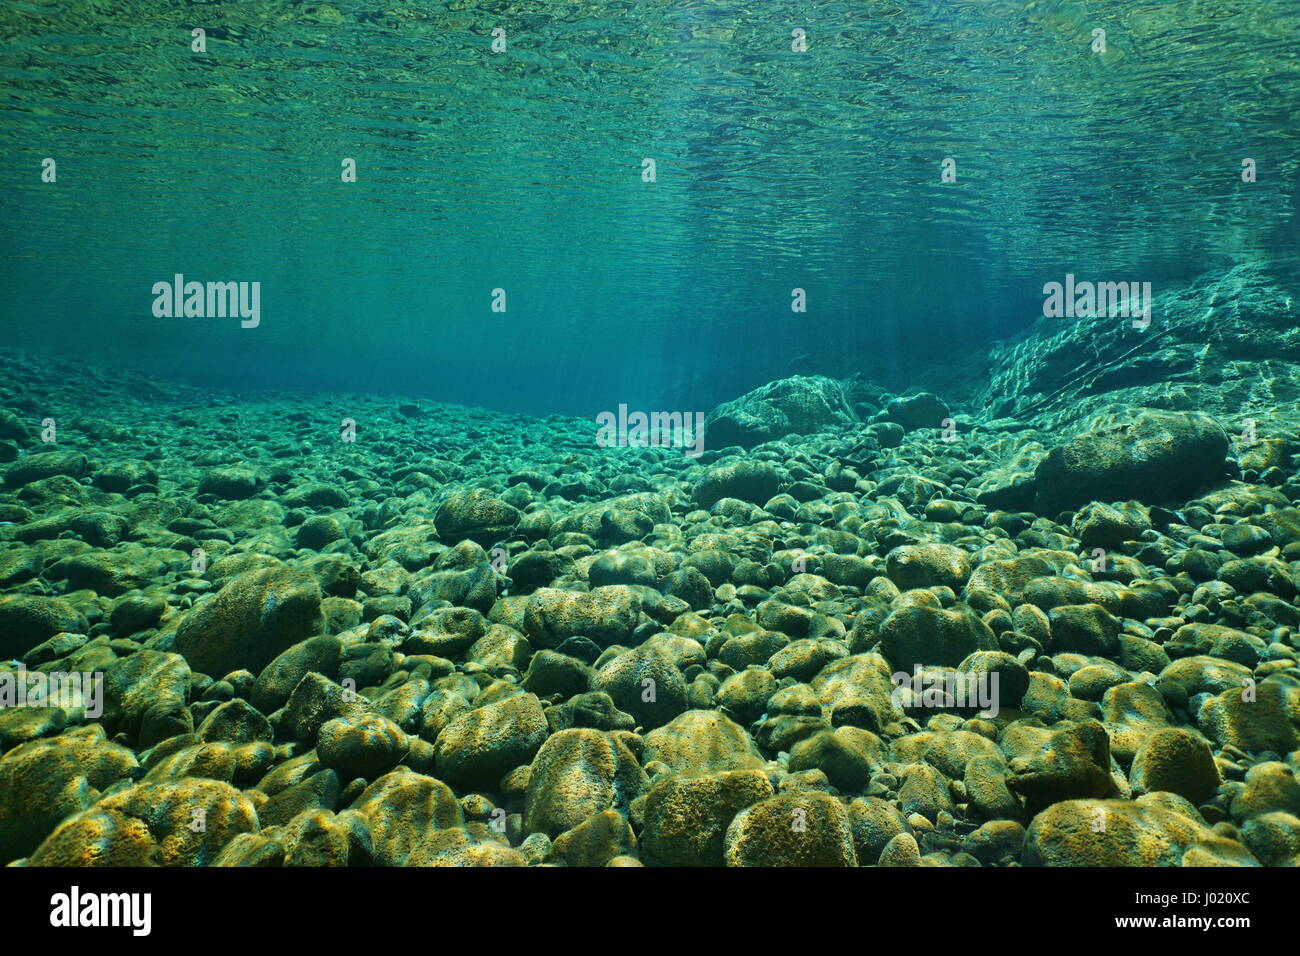 River underwater,  pebbles on the riverbed with clear water, natural scene, Dumbea, New Caledonia, south Pacific Stock Photo